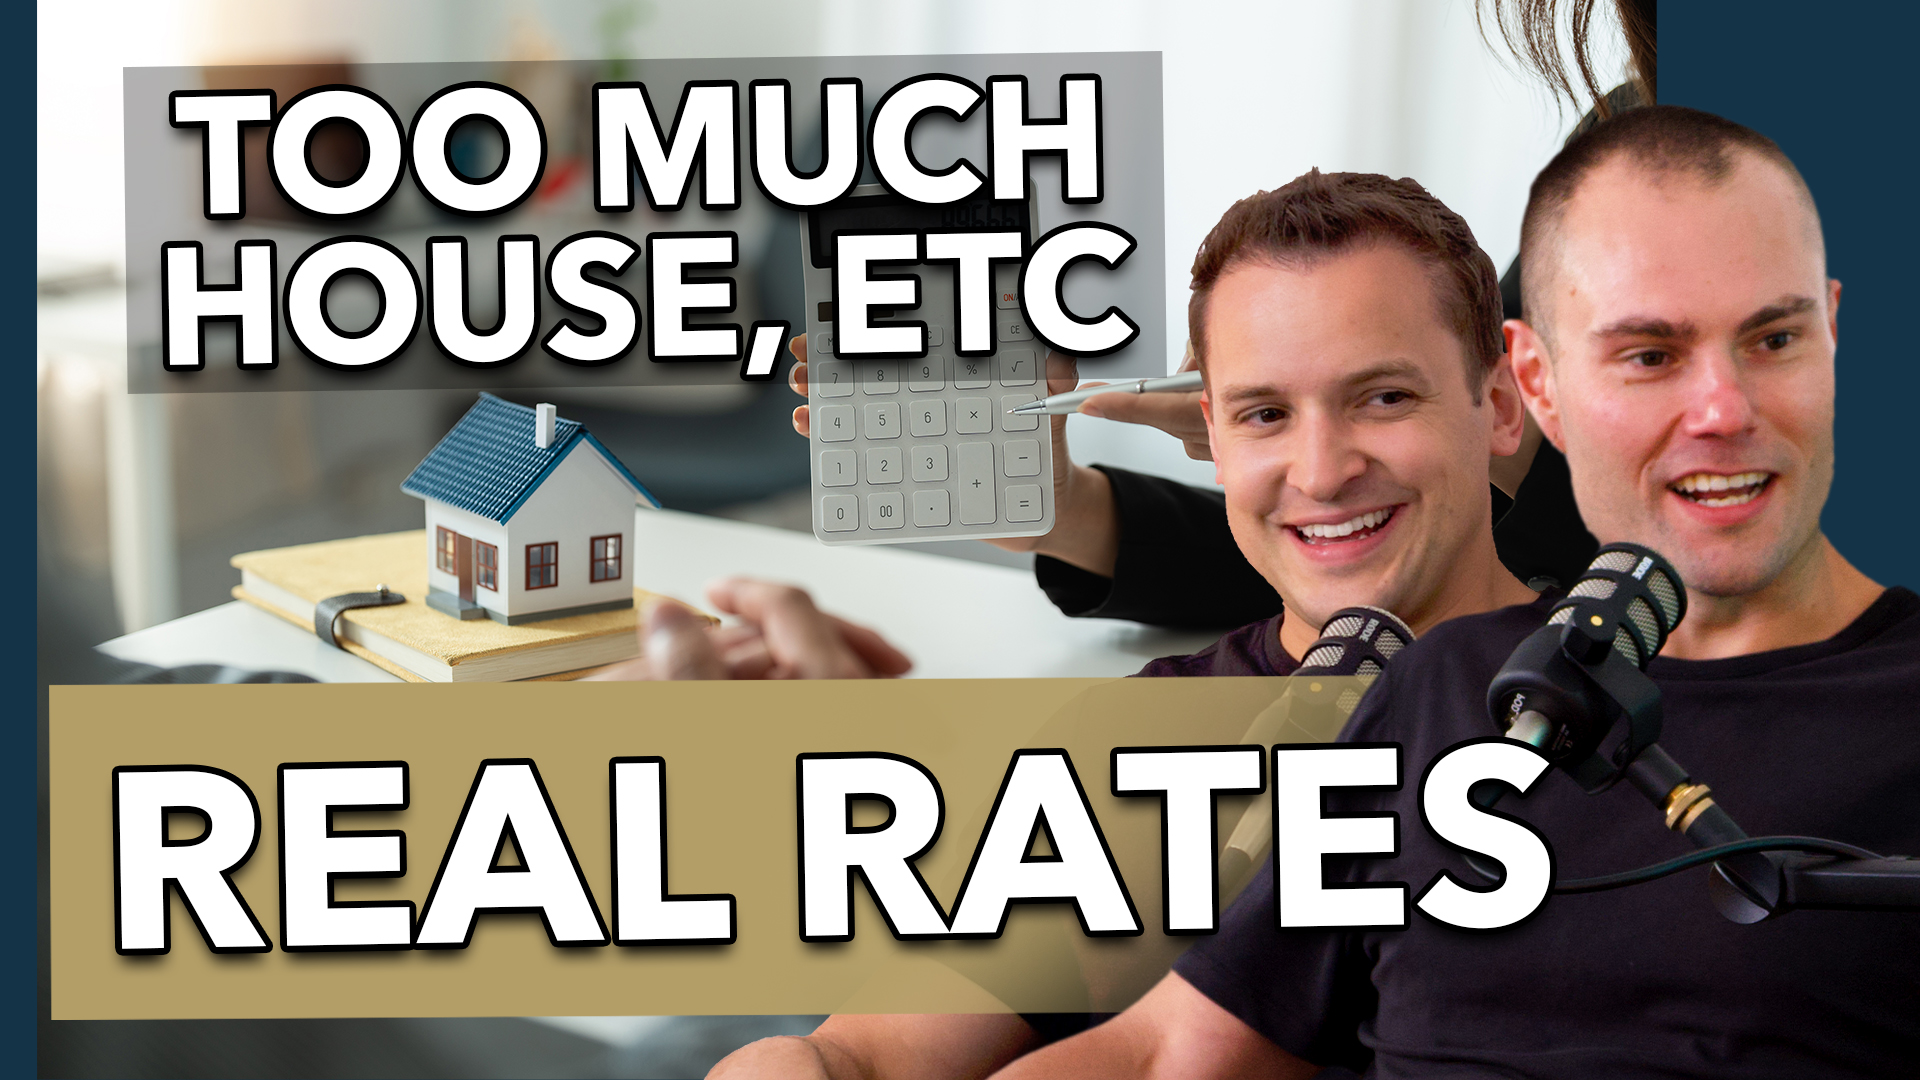 Real Rates, Too much House, Etc